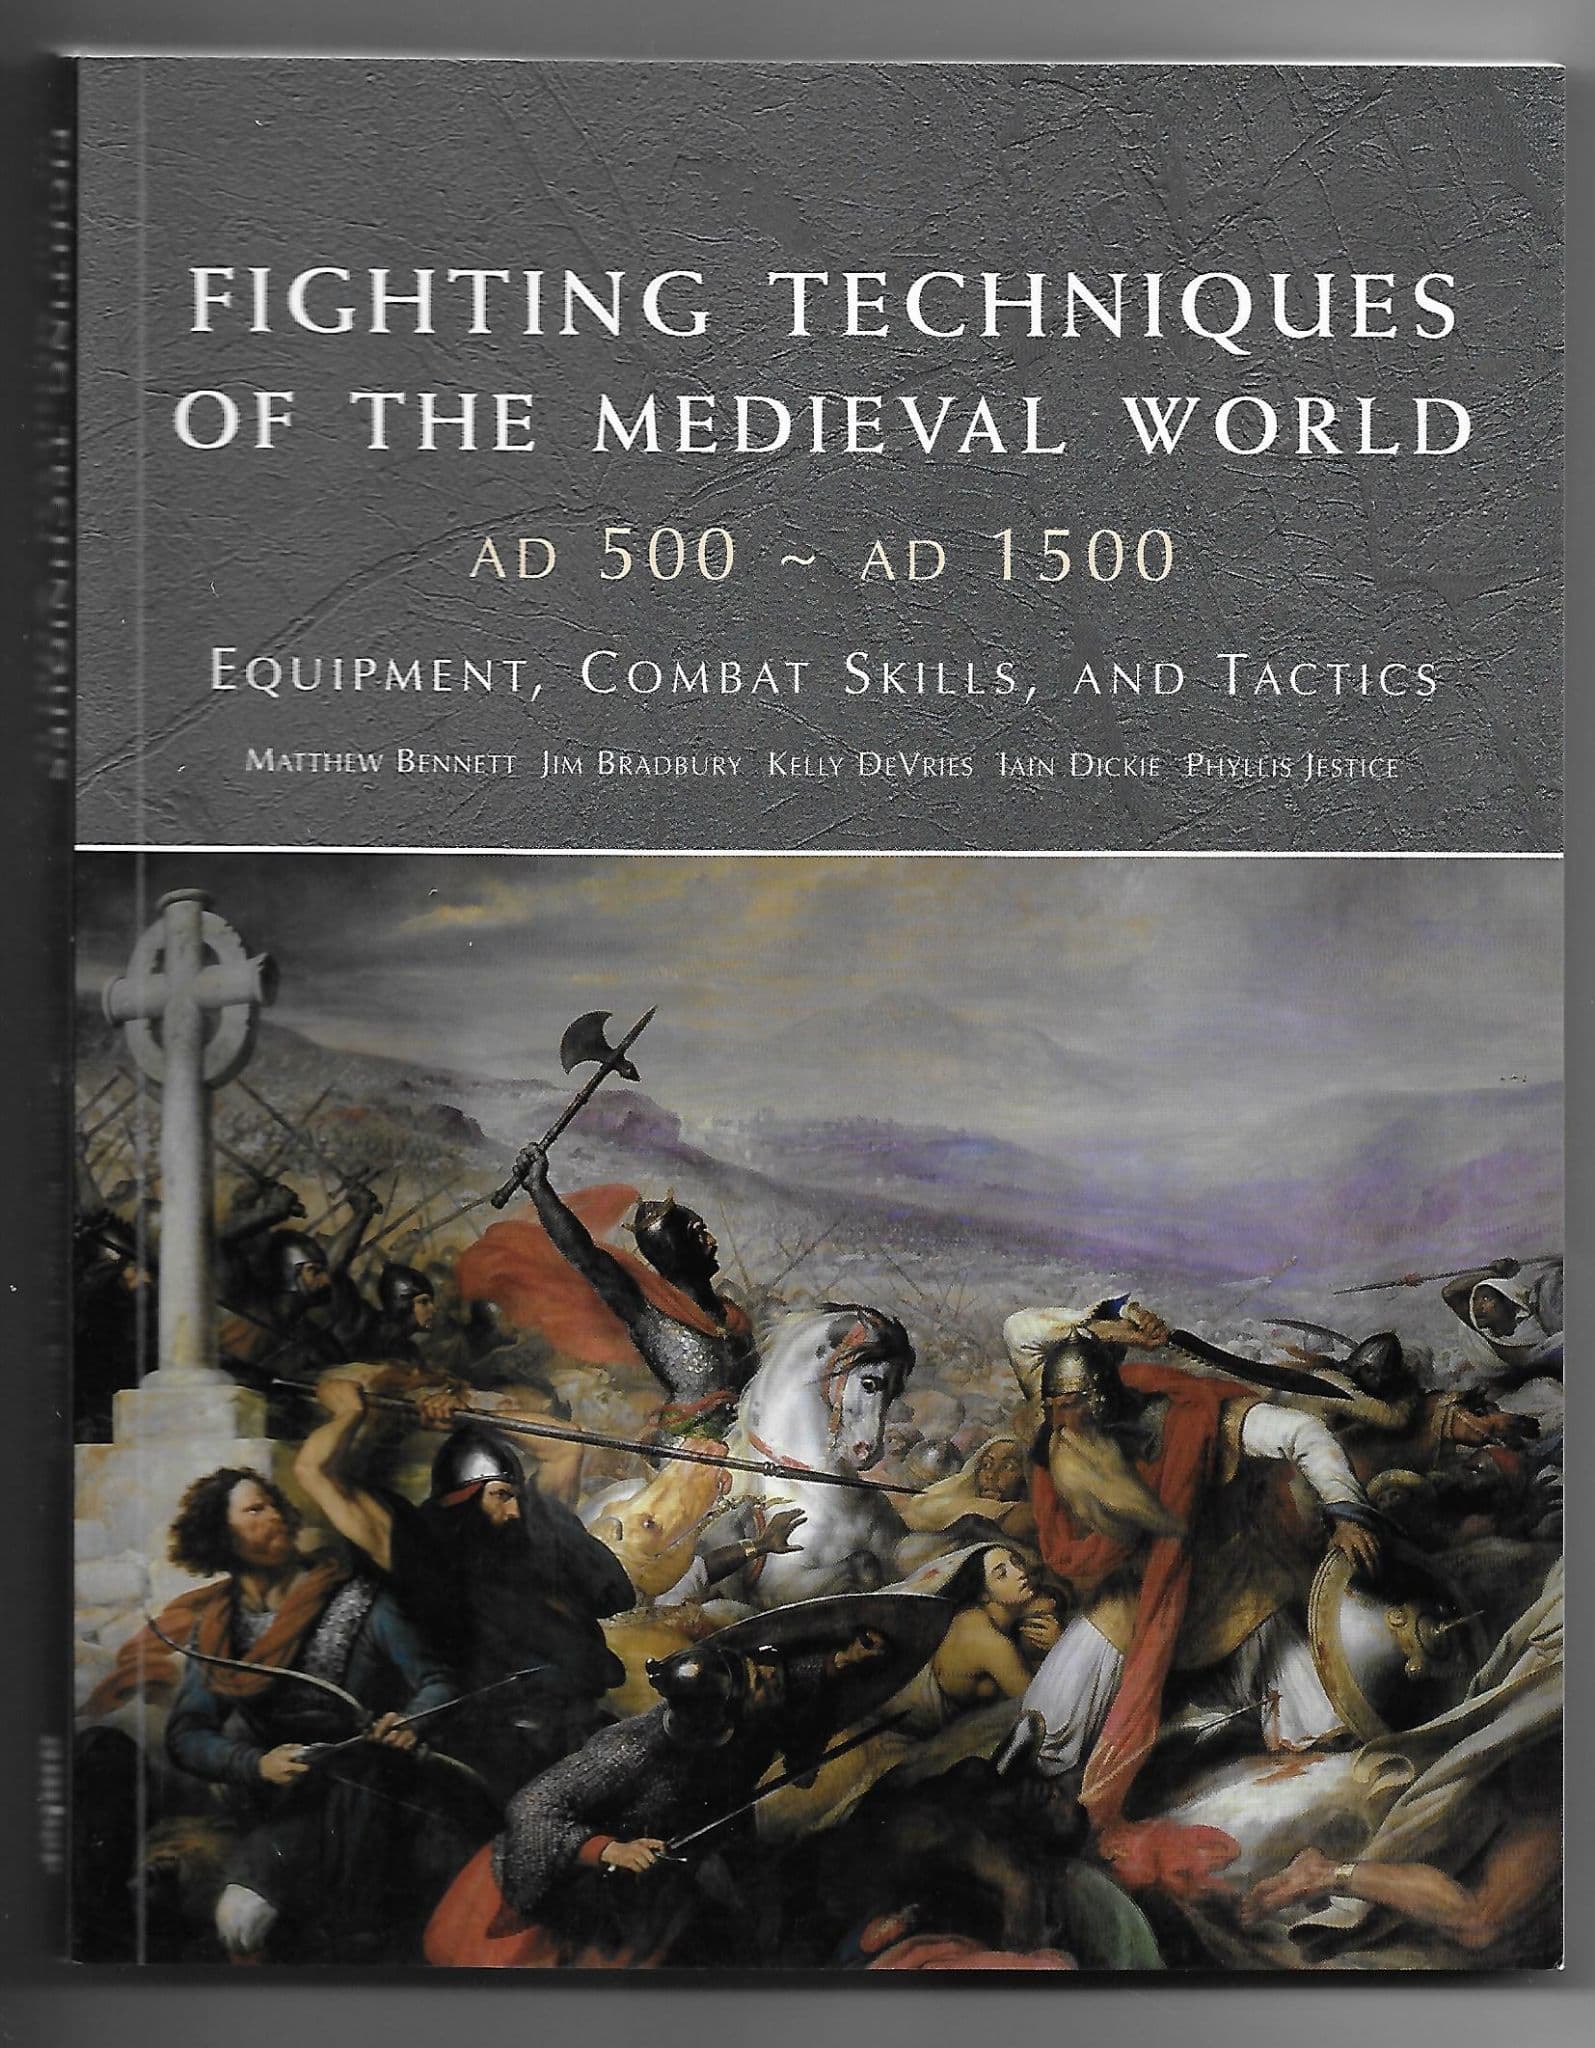 Fighting Techniques of the Medieval World AD 500 - AD 1500